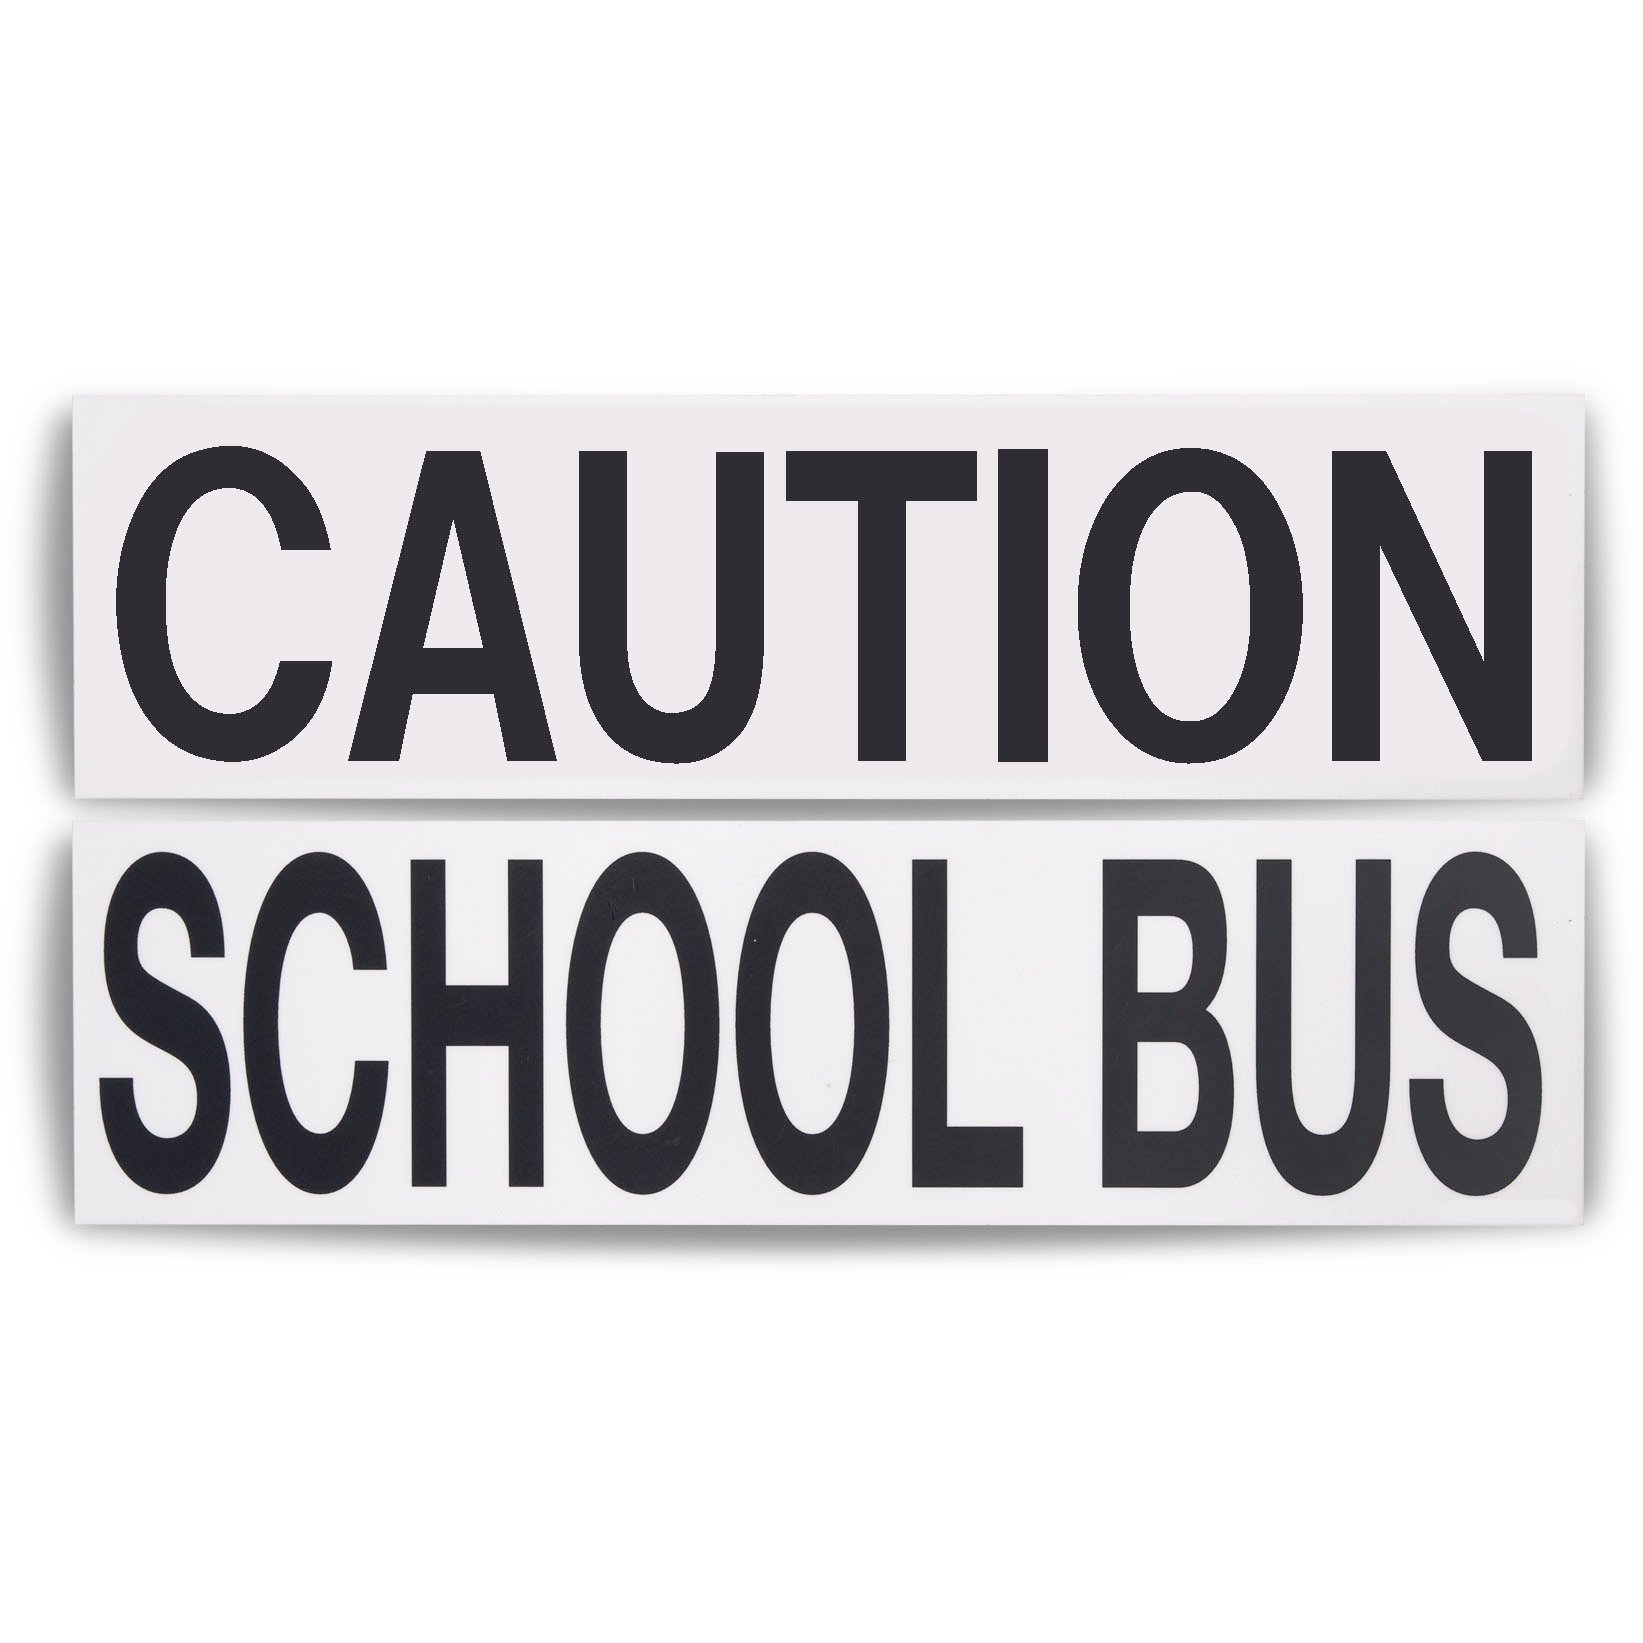 School Bus & Caution Signs – 2 piece, internally applied to school bus windscreens in South Australia. Useful for small & large sized school buses such as Mitsubishi Rosa, Toyota Coaster, Toyota HiAce Commuter, LDV, Yutong, King Long, BCI, Marco Polo, Volvo, Scania, Volgren.